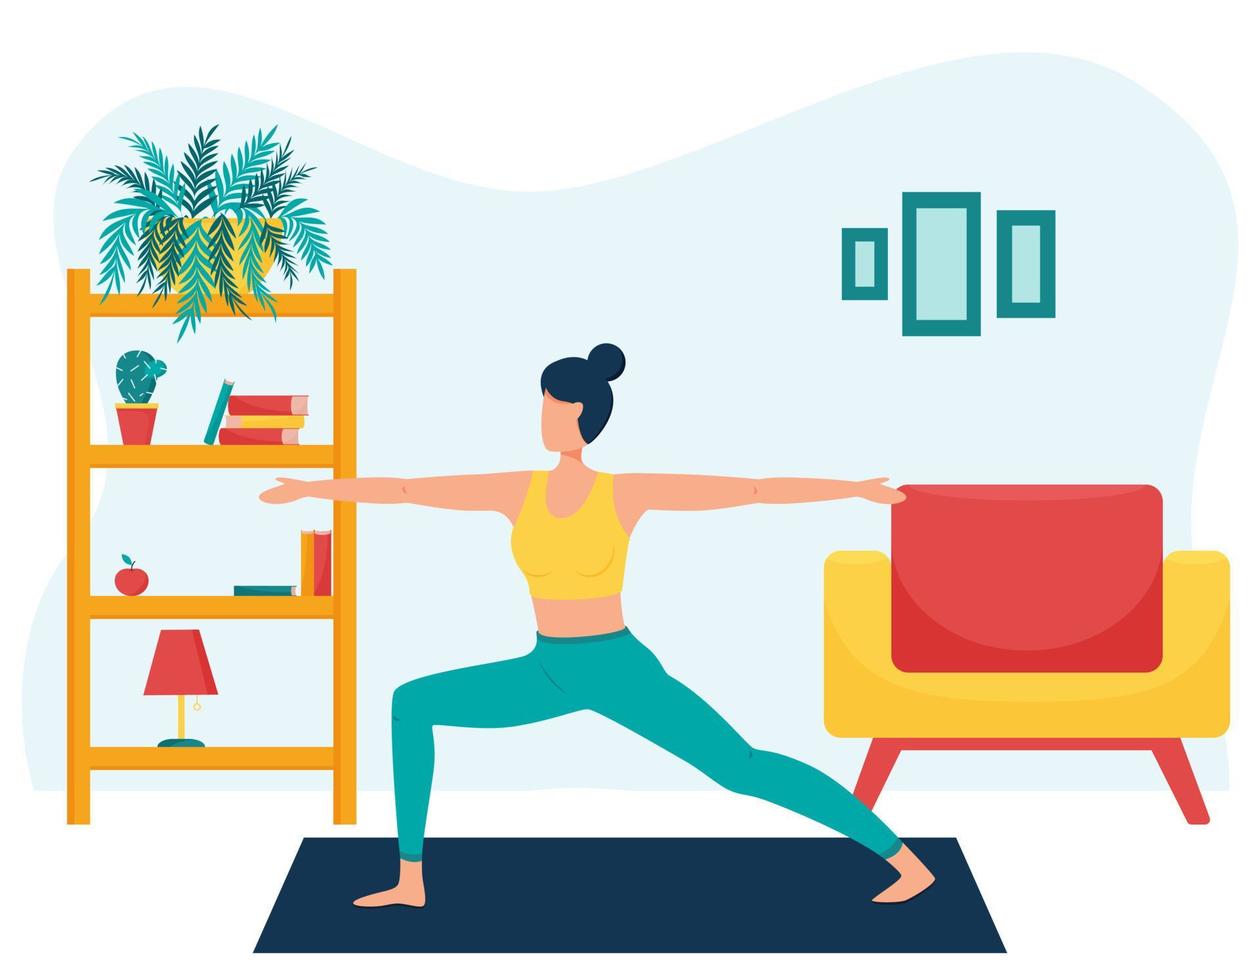 The girl practices yoga at home. The concept of yoga classes at home. a woman in the pose of a warrior. Practice yoga. Flat style. Healthy lifestyle. Female cartoon character in the living room. vector